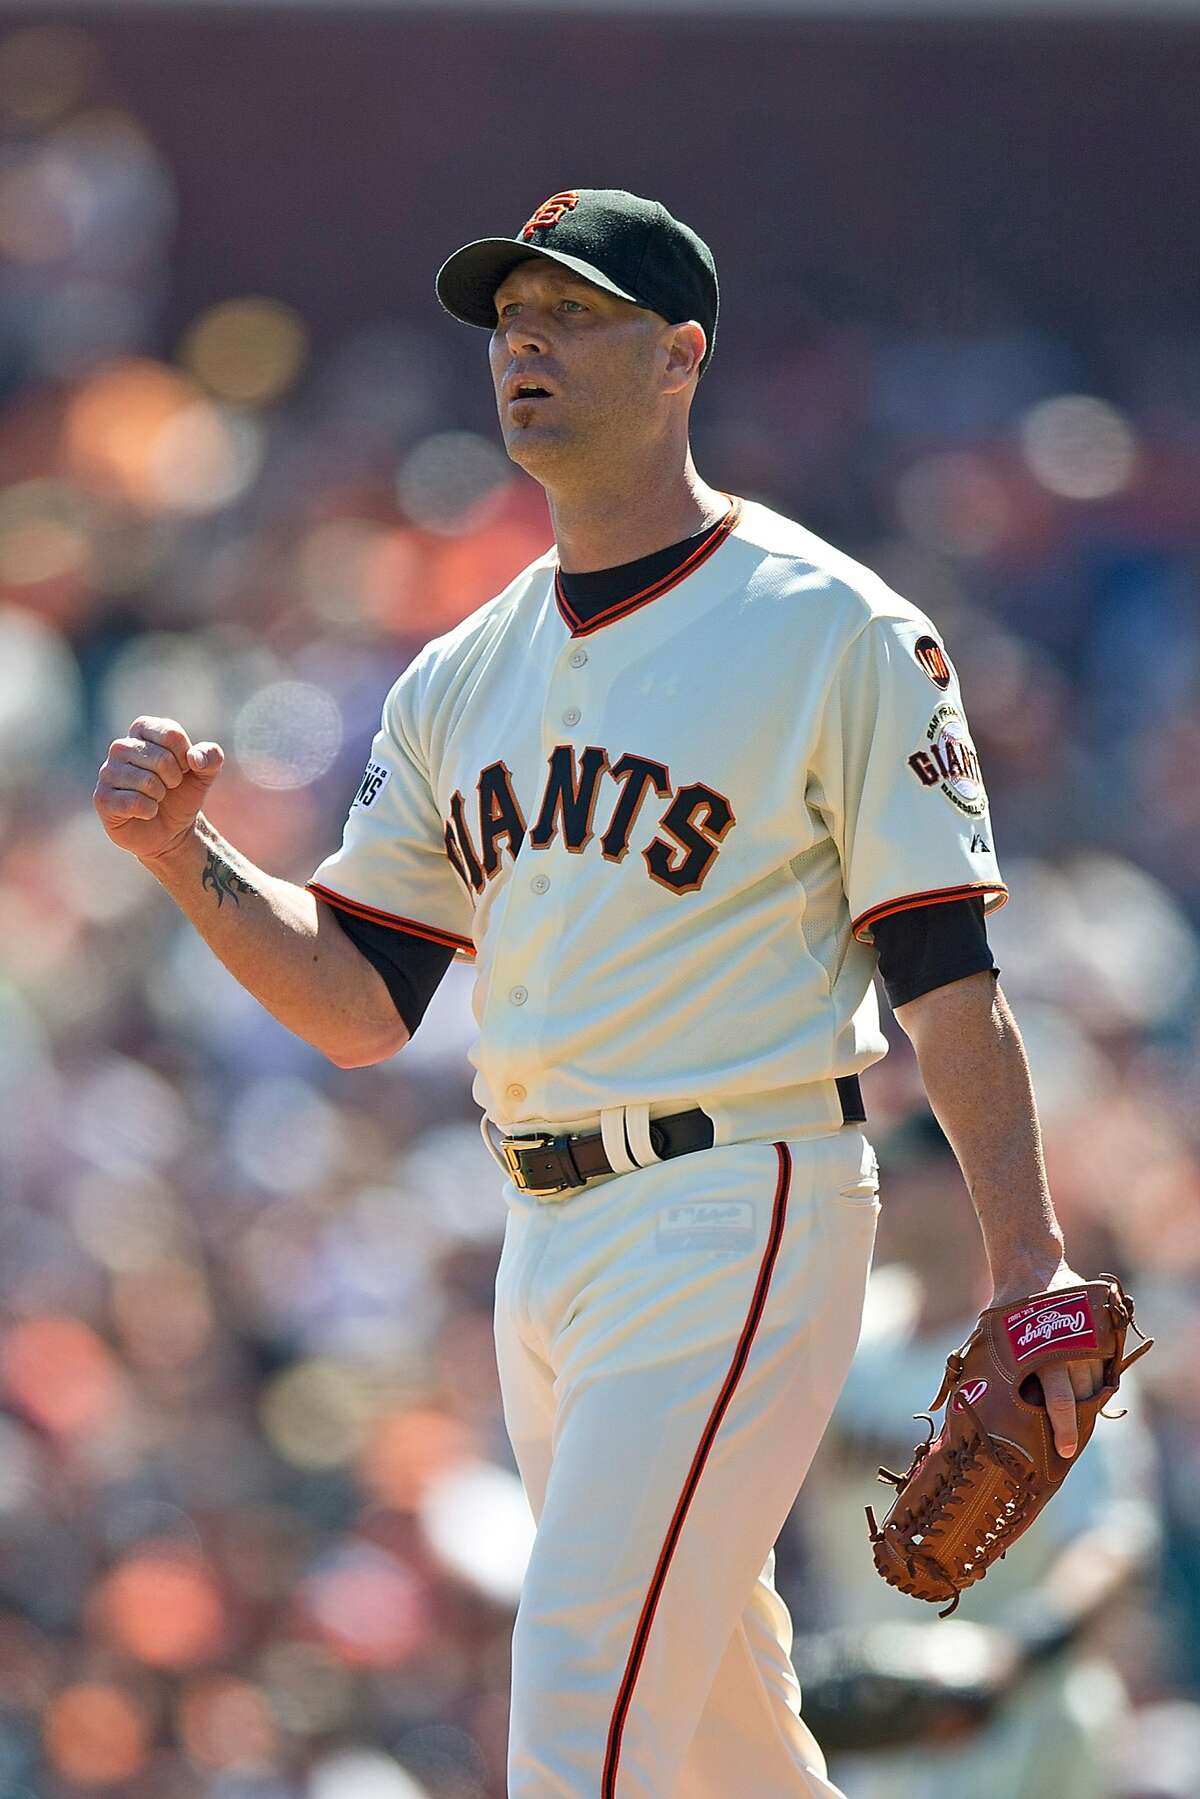 Tim Hudson of the San Francisco Giants celebrates after a play by Brandon Crawford (not pictured) against the Arizona Diamondbacks during the first inning at AT&T Park on September 20, 2015 in San Francisco, California.